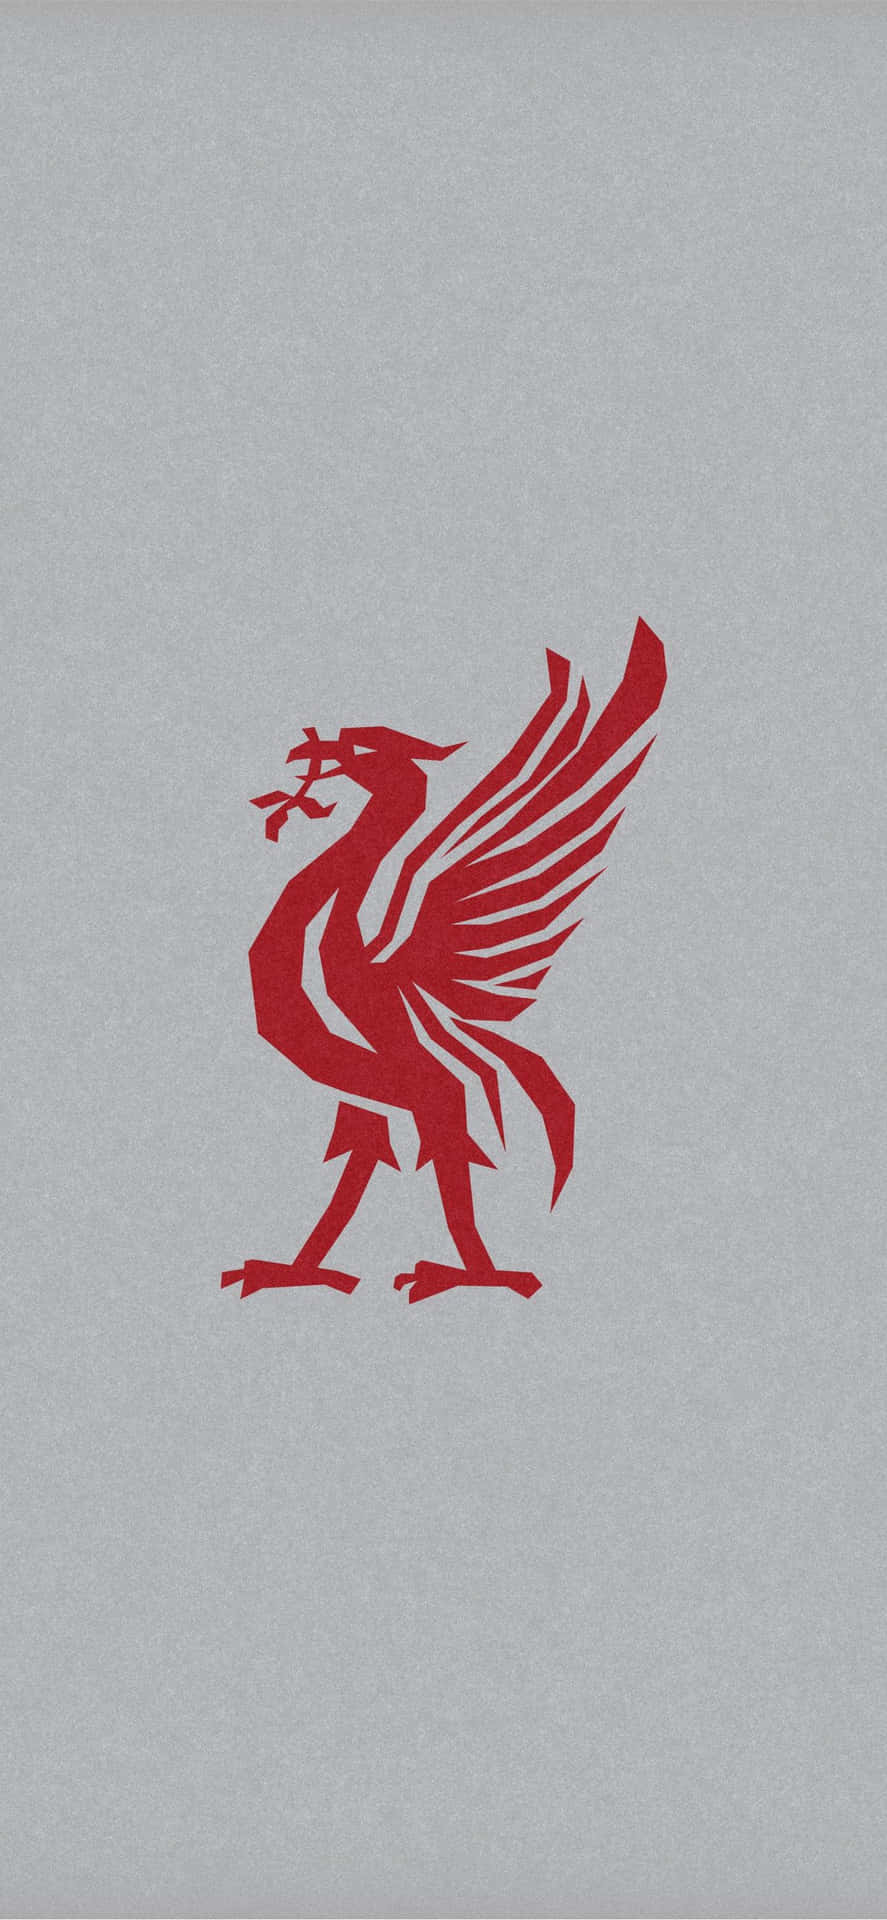 Proudly display your Liverpool F.C. pride with the official Liverpool iPhone Wallpaper